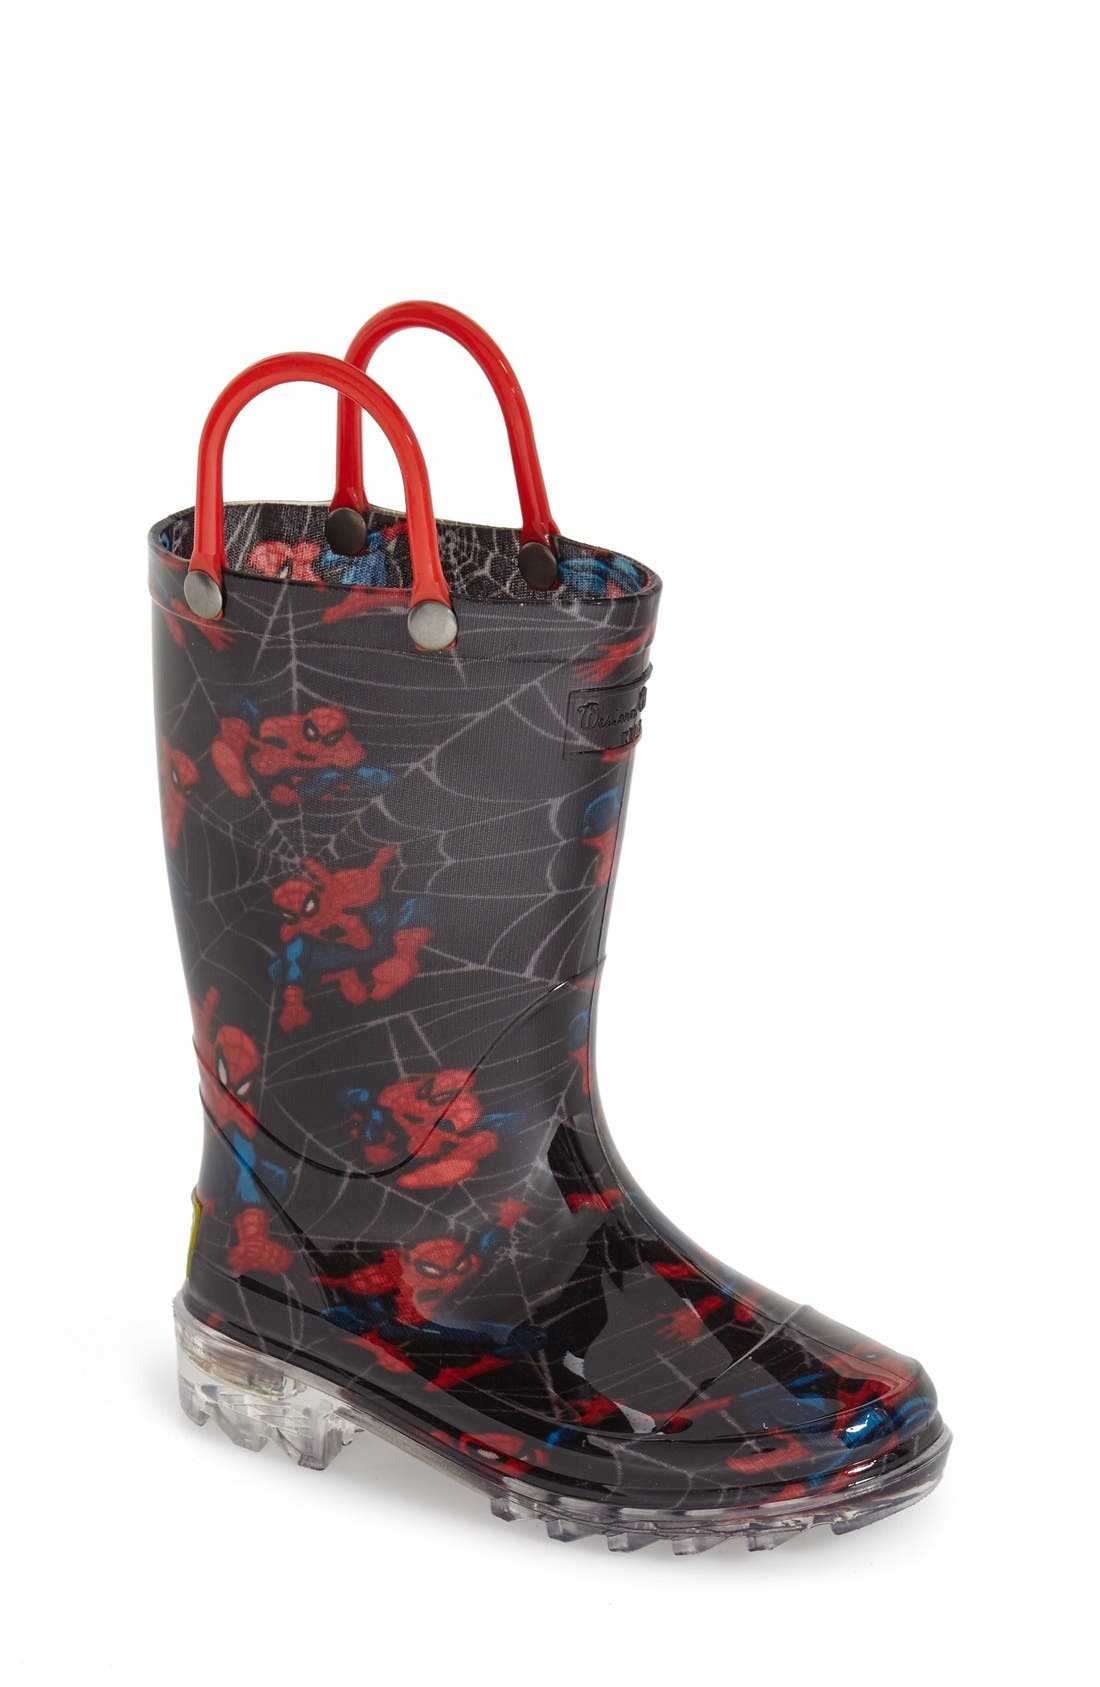 spiderman light up boots